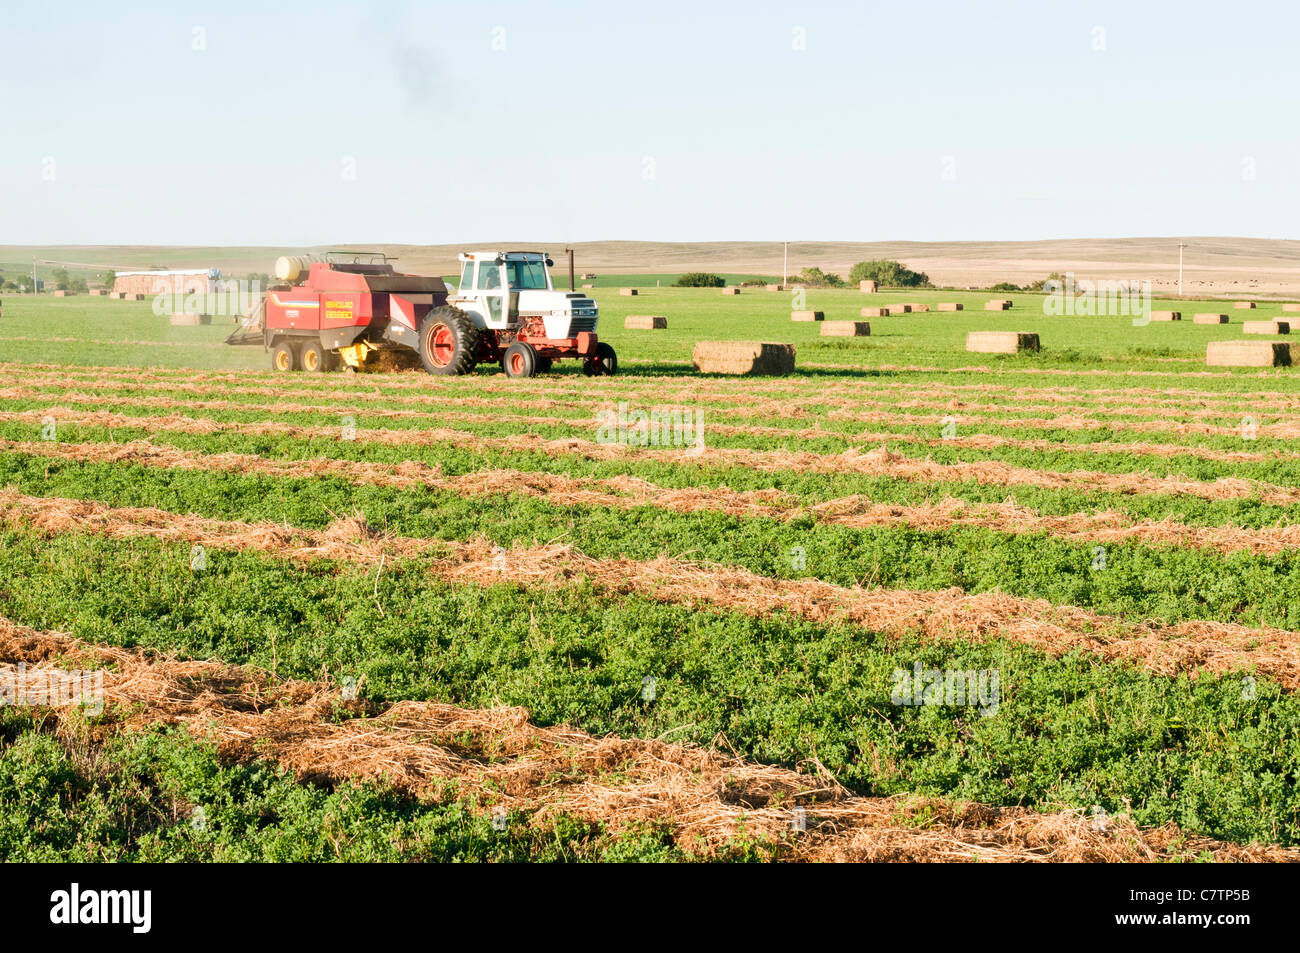 A tractor pulling a baling machine is at work producing square bales in an alfalfa field. Stock Photo